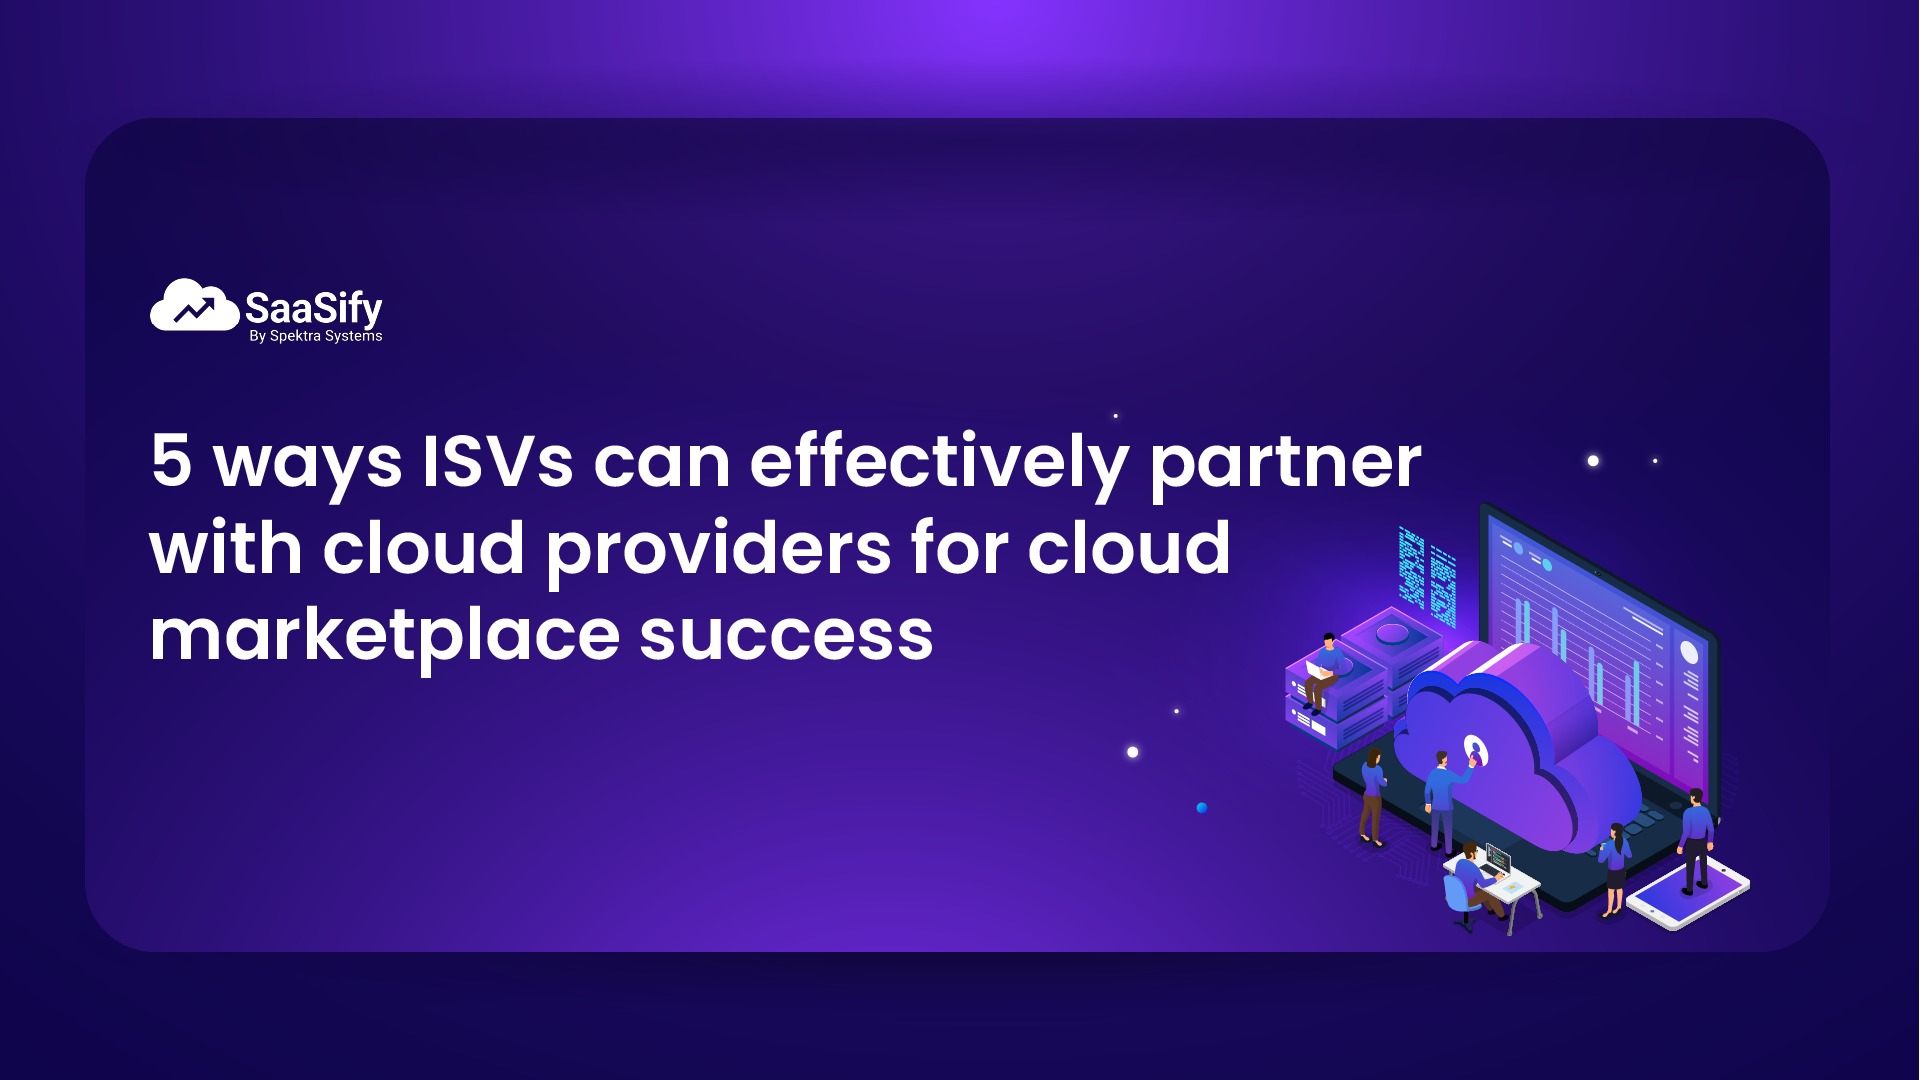 5 ways ISVs can effectively partner with cloud providers for cloud marketplace success